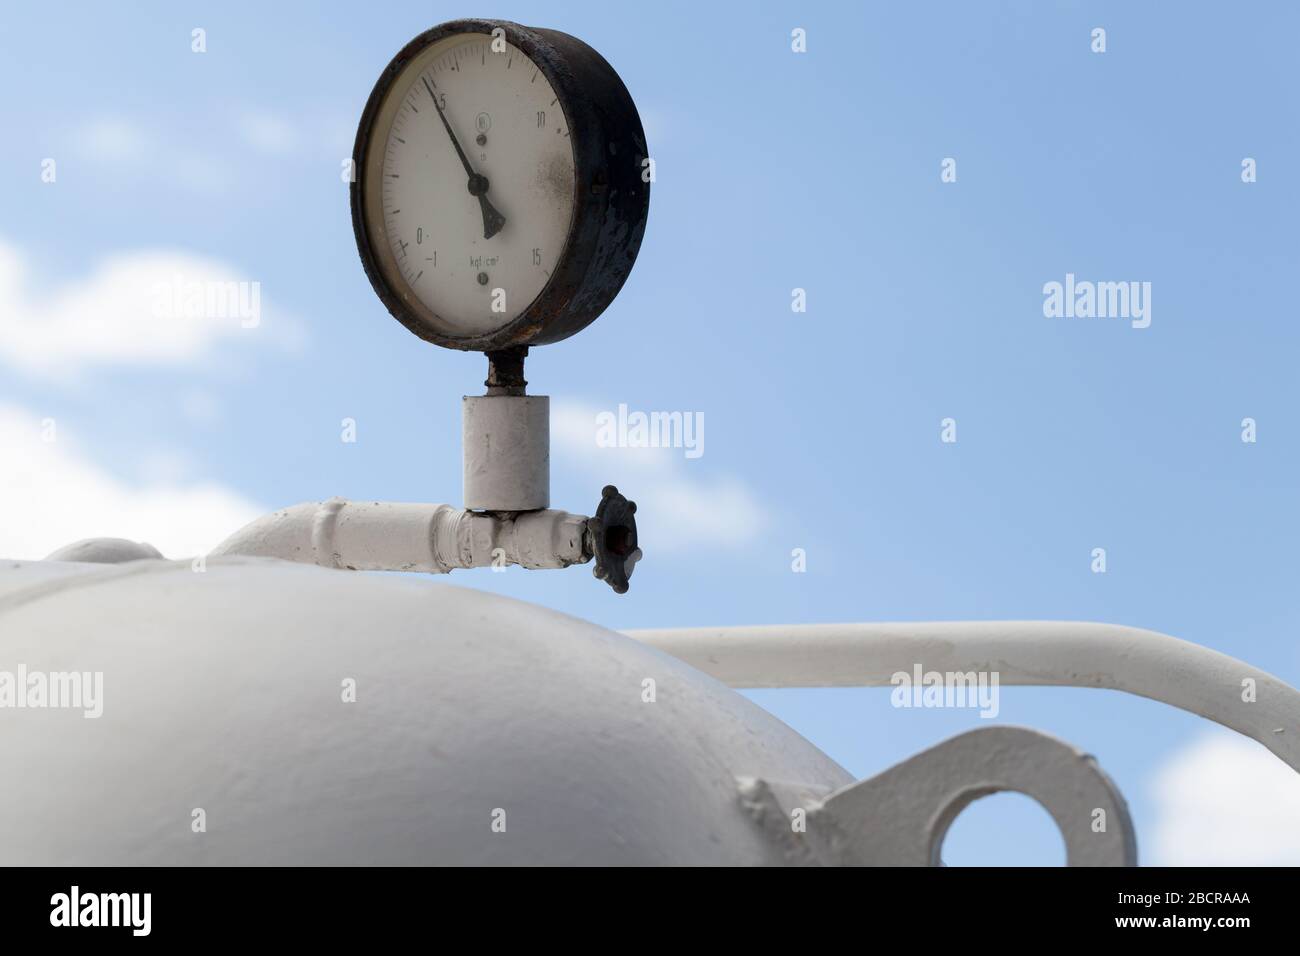 Round industrial pressure gauge mounted on a white gas tank is under blue sky Stock Photo